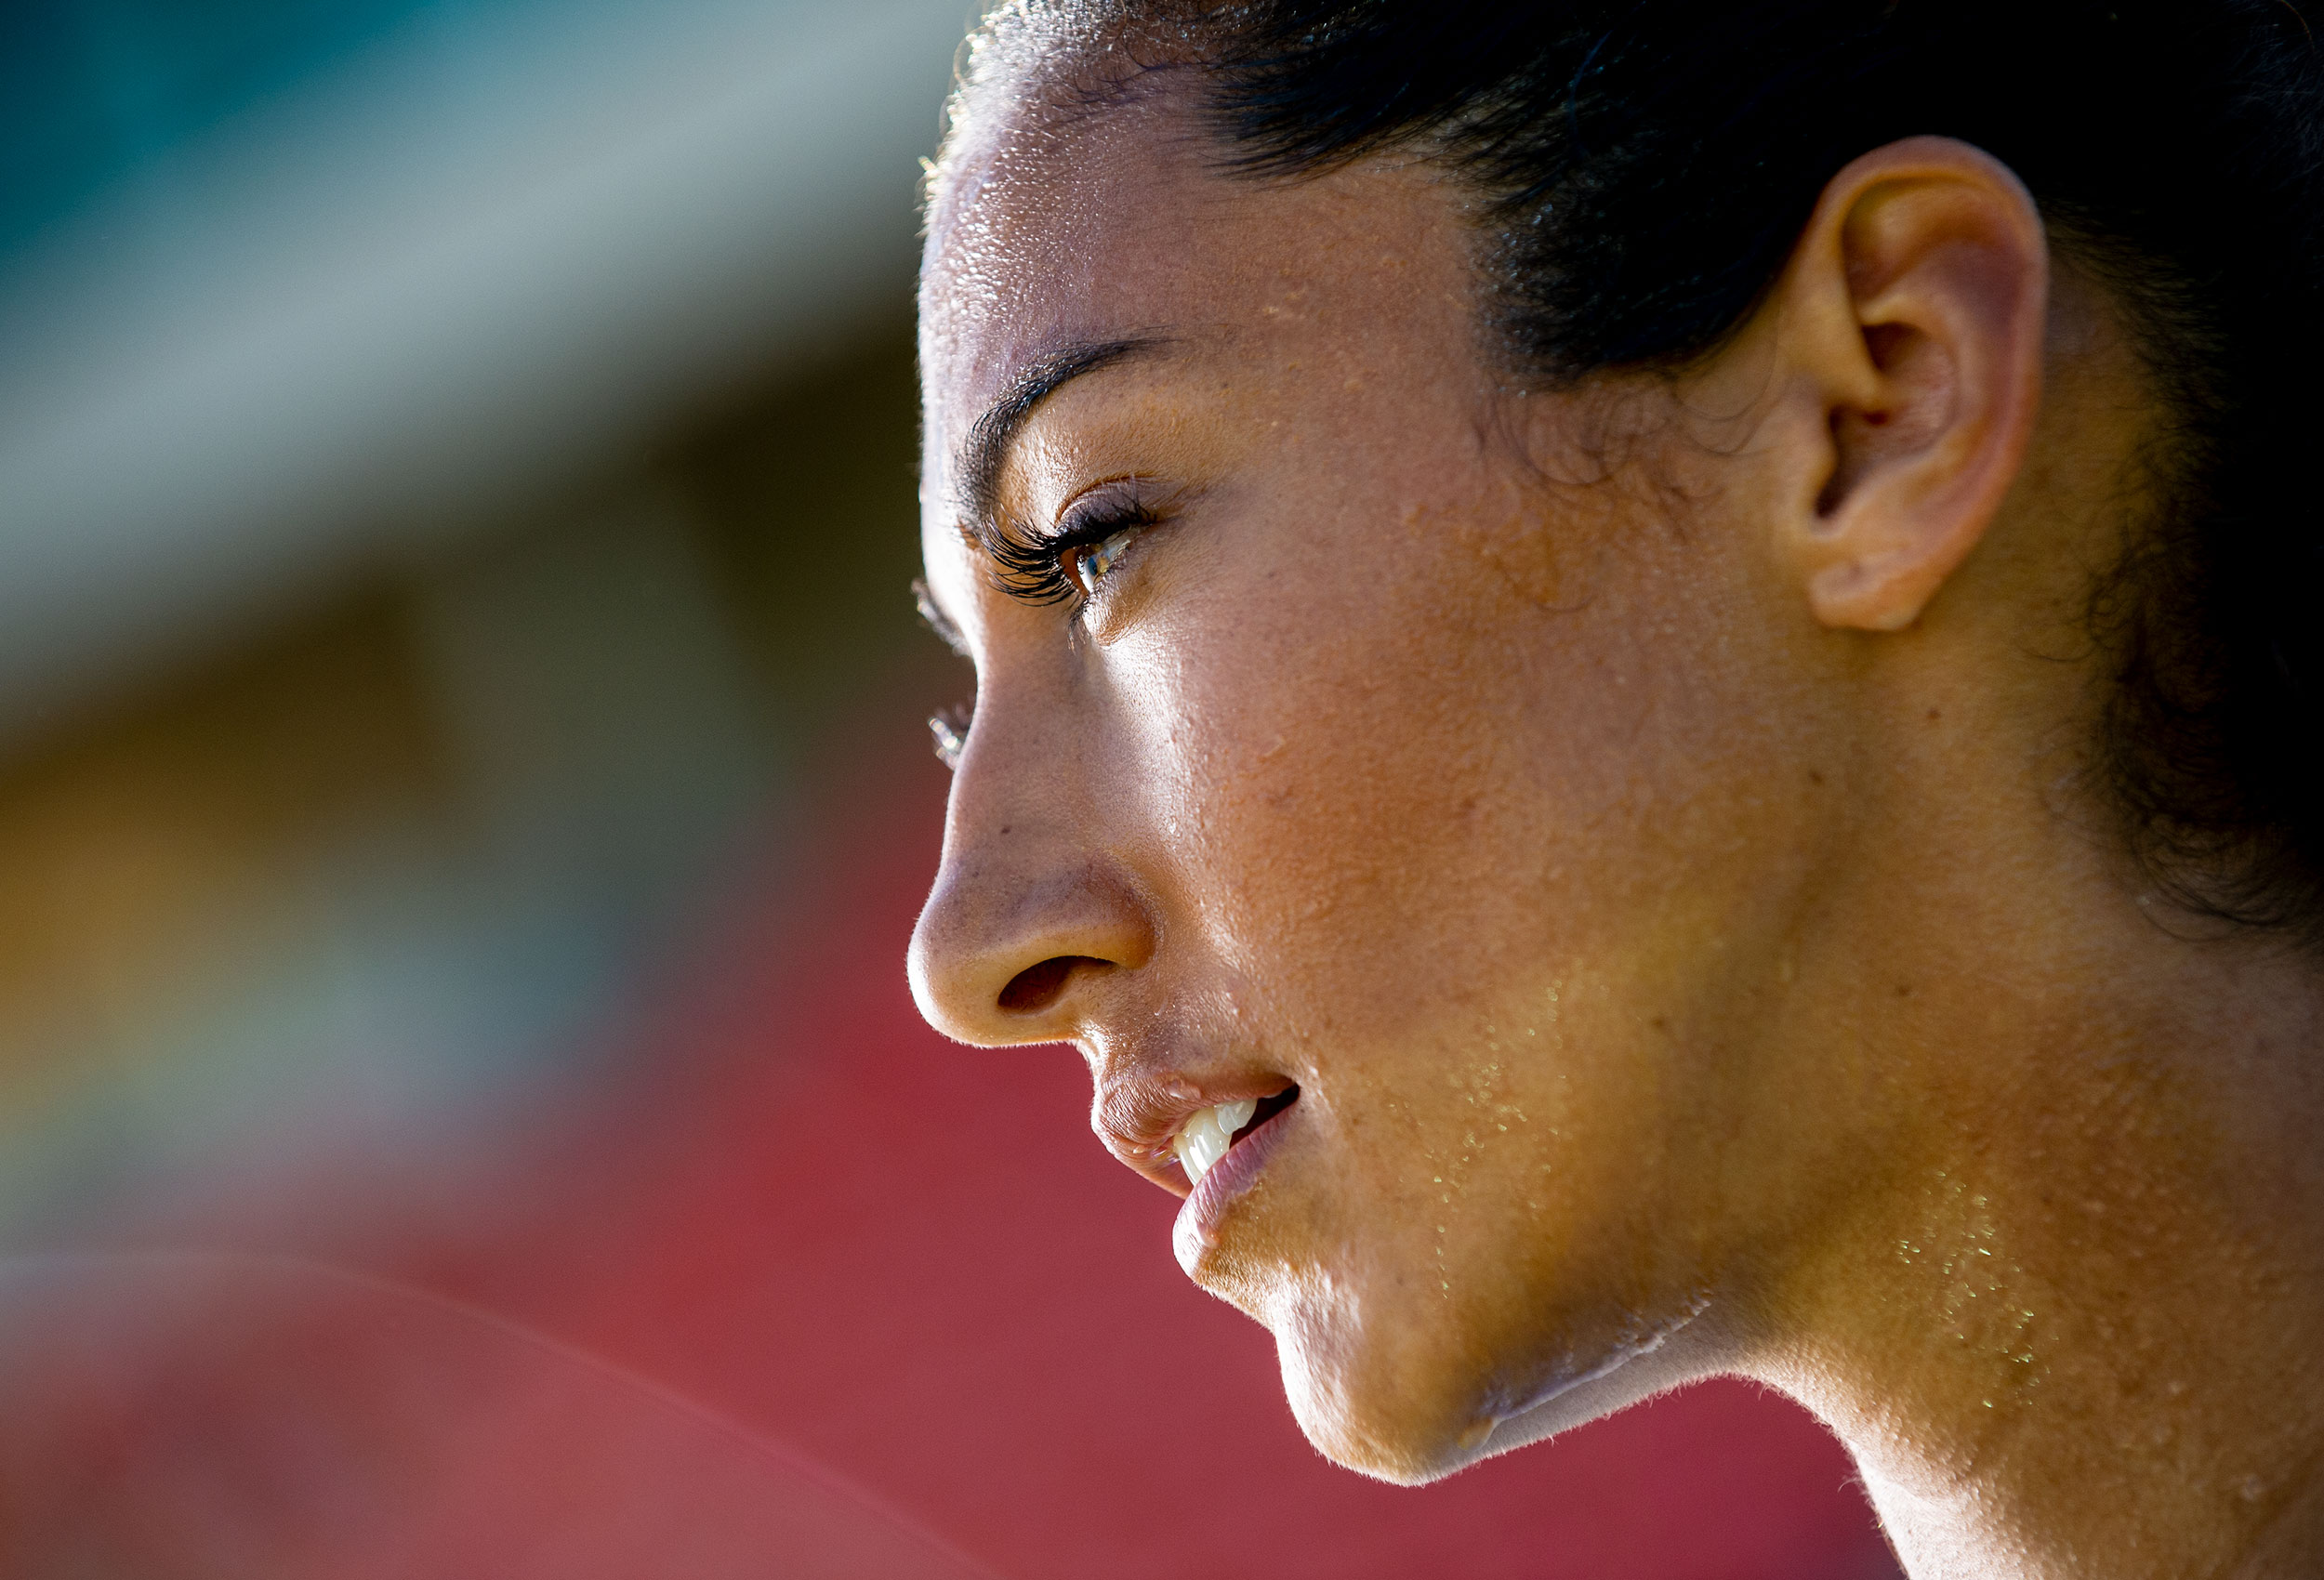 Christen Press, professional soccer player knows how to stay hydrated when she spends all day in the sun. When it comes to protecting her skin from UV rays while keeping it hydrated, she trusts Coppertone Sport Sunscreen